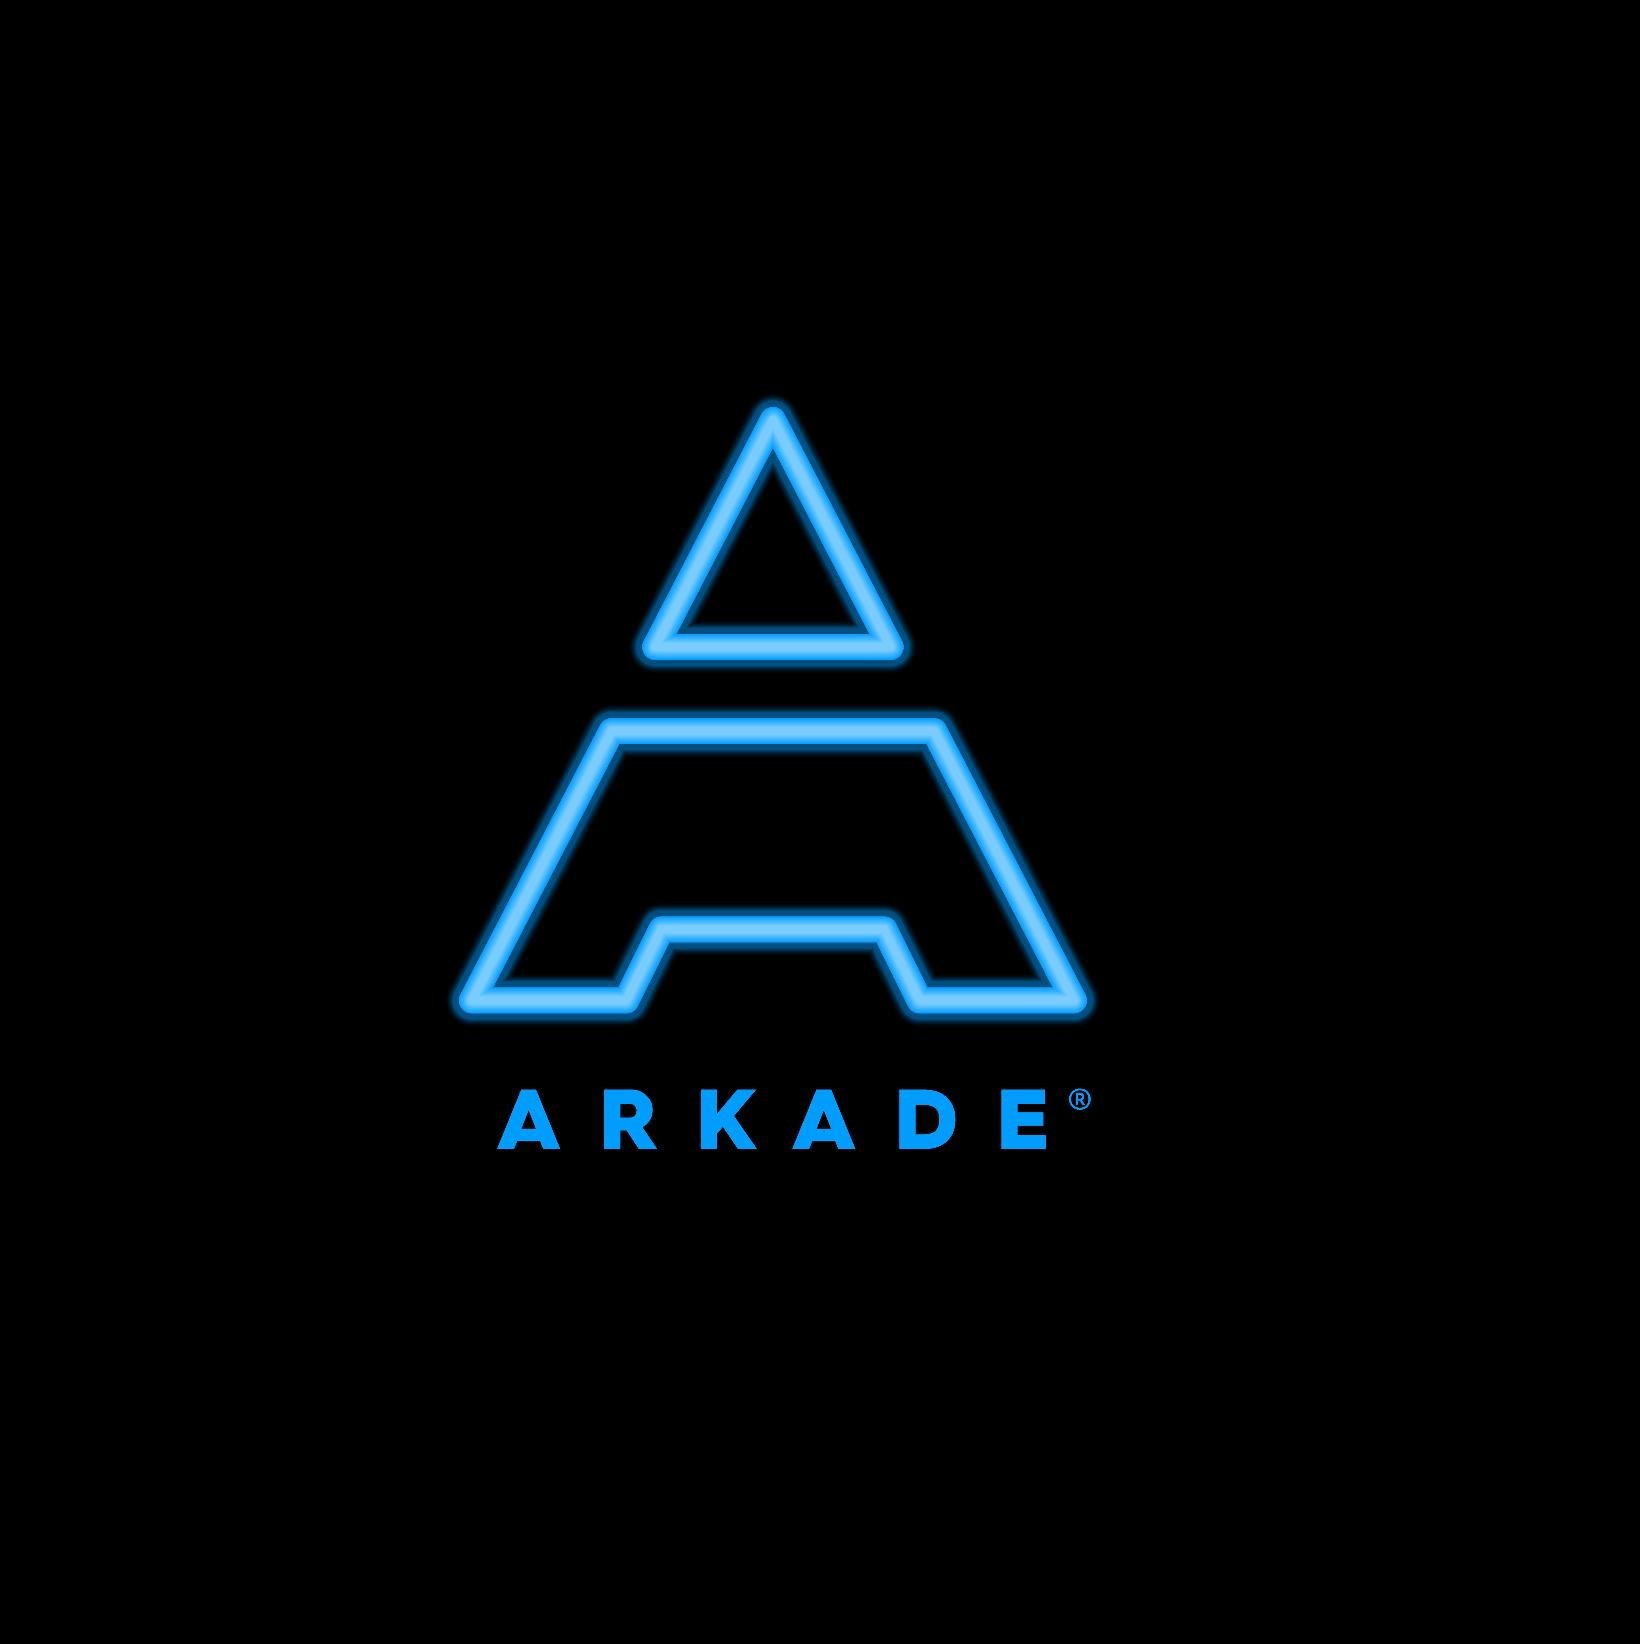 ARKADE Official Account | The ARKADE Blaster | The evolution of First Person Shooters is about to drop. Join the action at https://t.co/JiGhyDAOTd